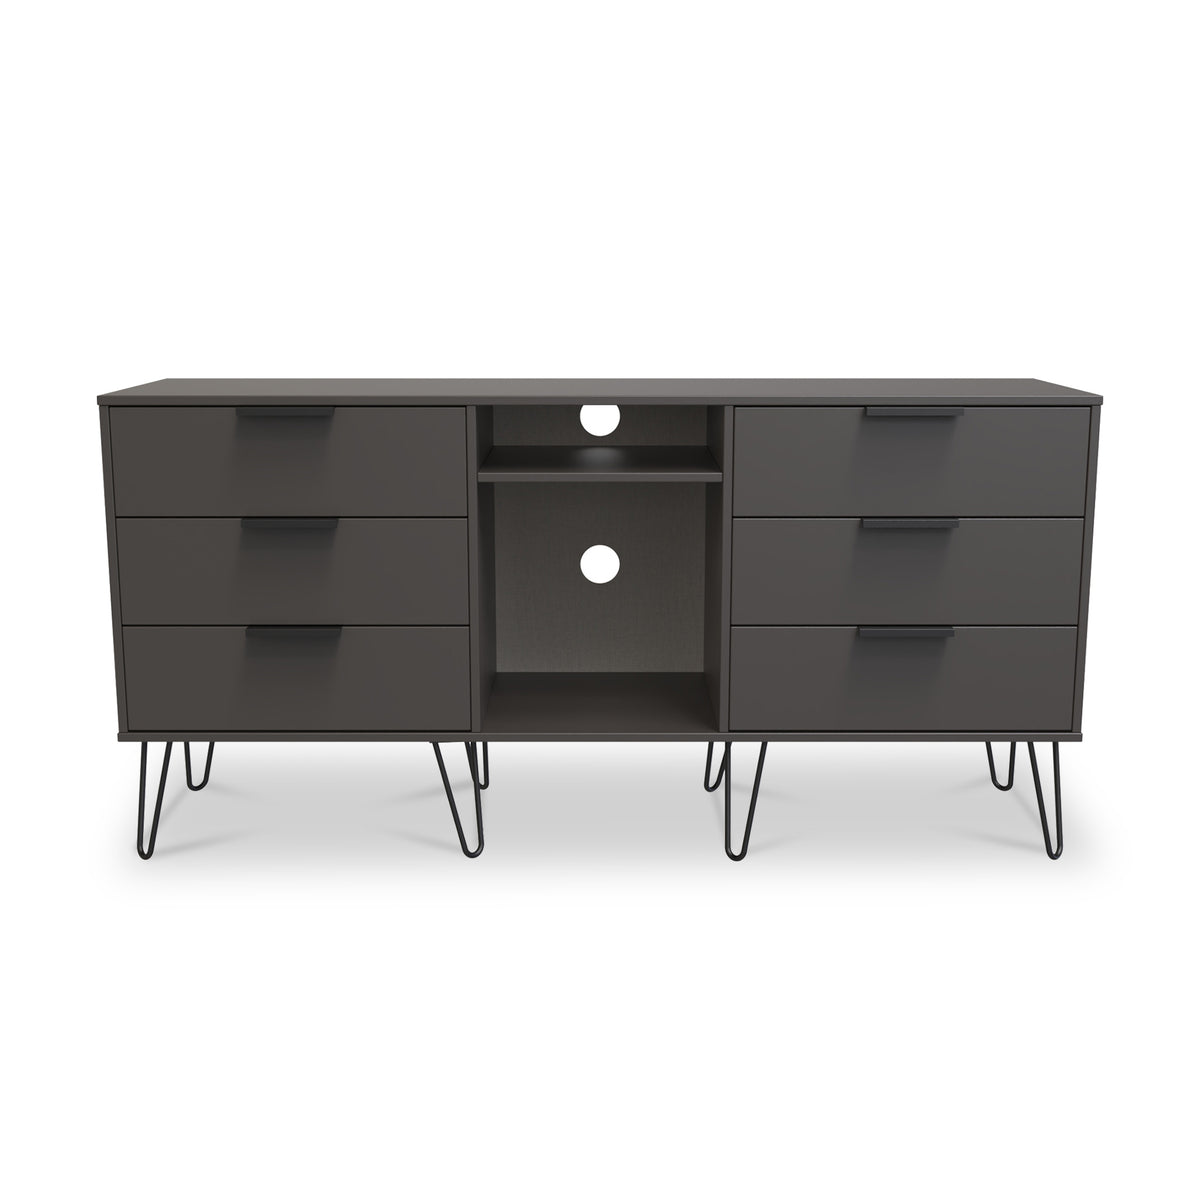 Moreno Graphite with Gold Hairpin Legs 6 Drawer Sideboard from Roseland Furniture